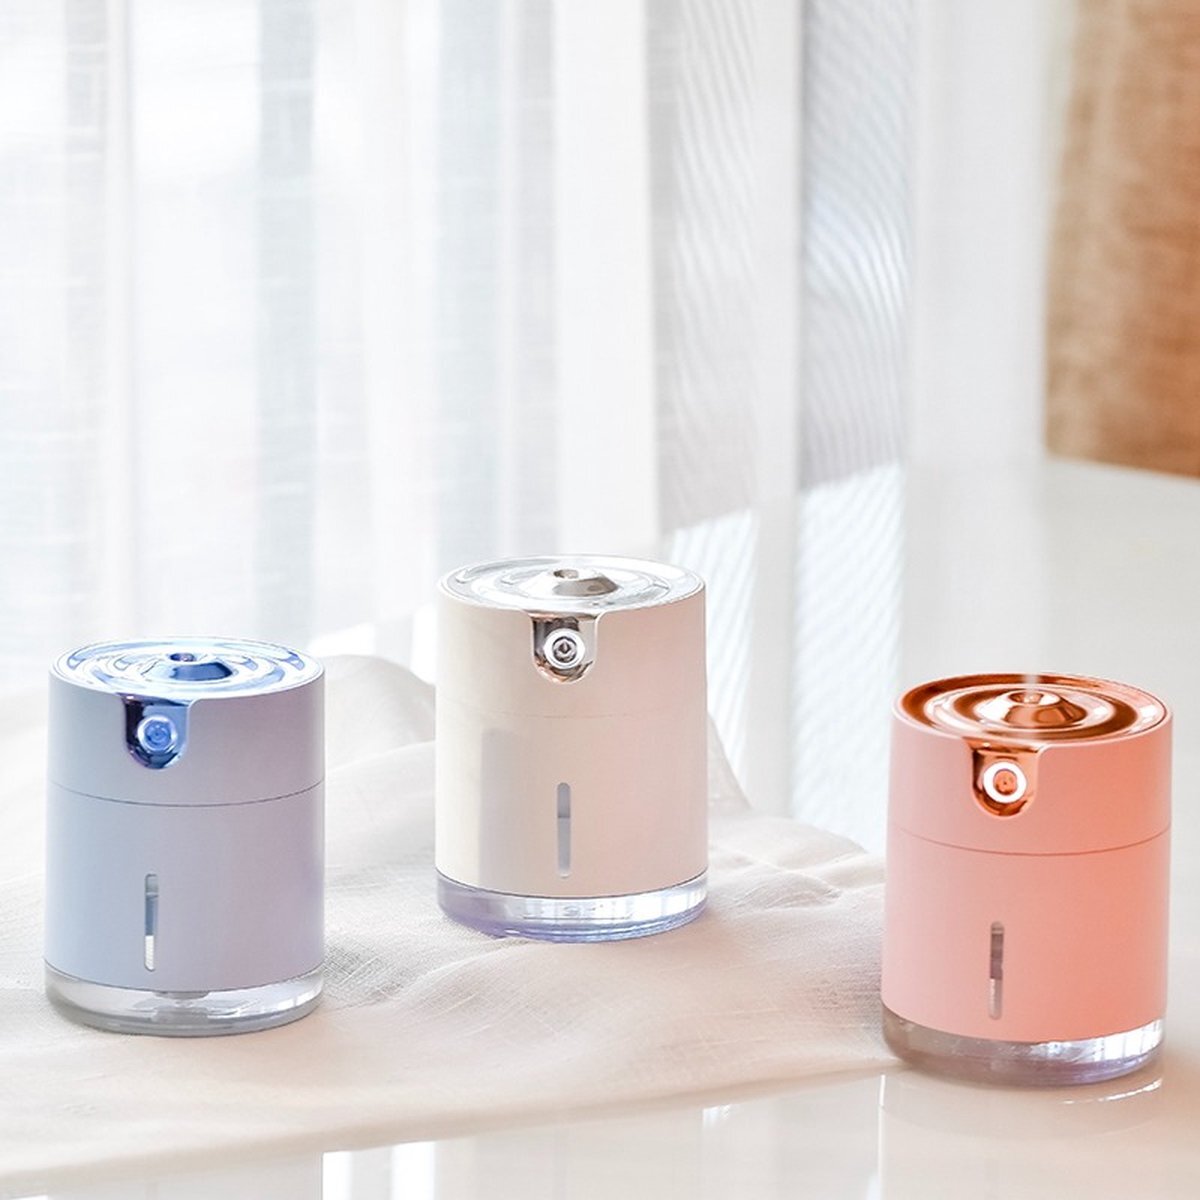 HUIZING PRODUCTS UIERCREME Luchtbevochtiger - Portable - Plug & Play - Humidifier - Lucht koeler - Air cooler